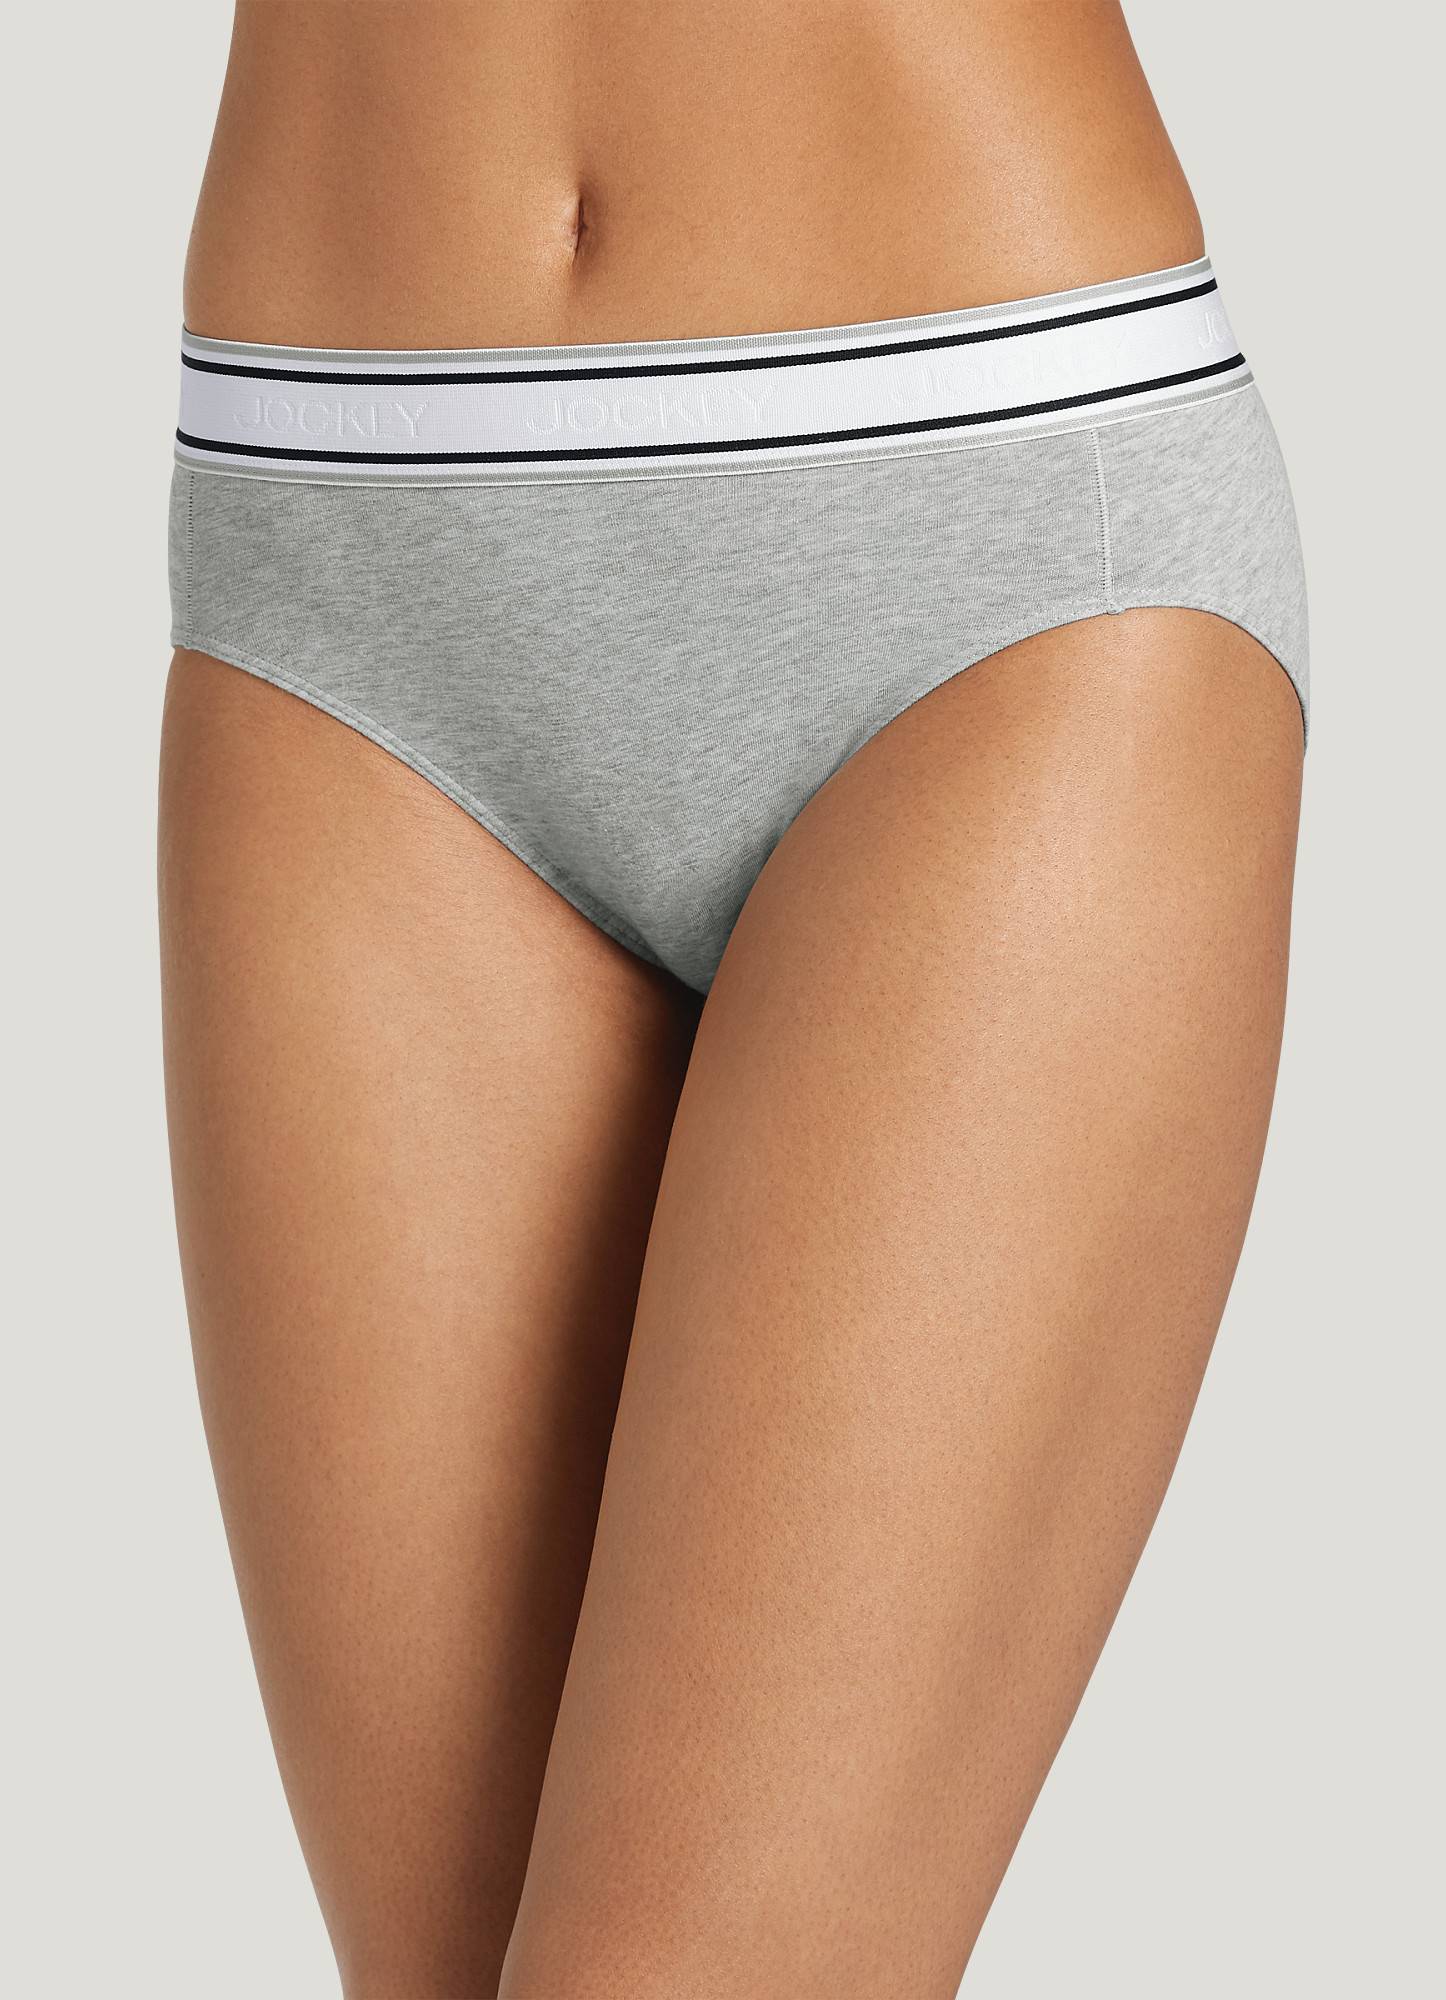 Jockey Retro Stripe Hi-cut Panty Underwear 2254, First At Macy's, Also  Available In Extended Sizes in Red